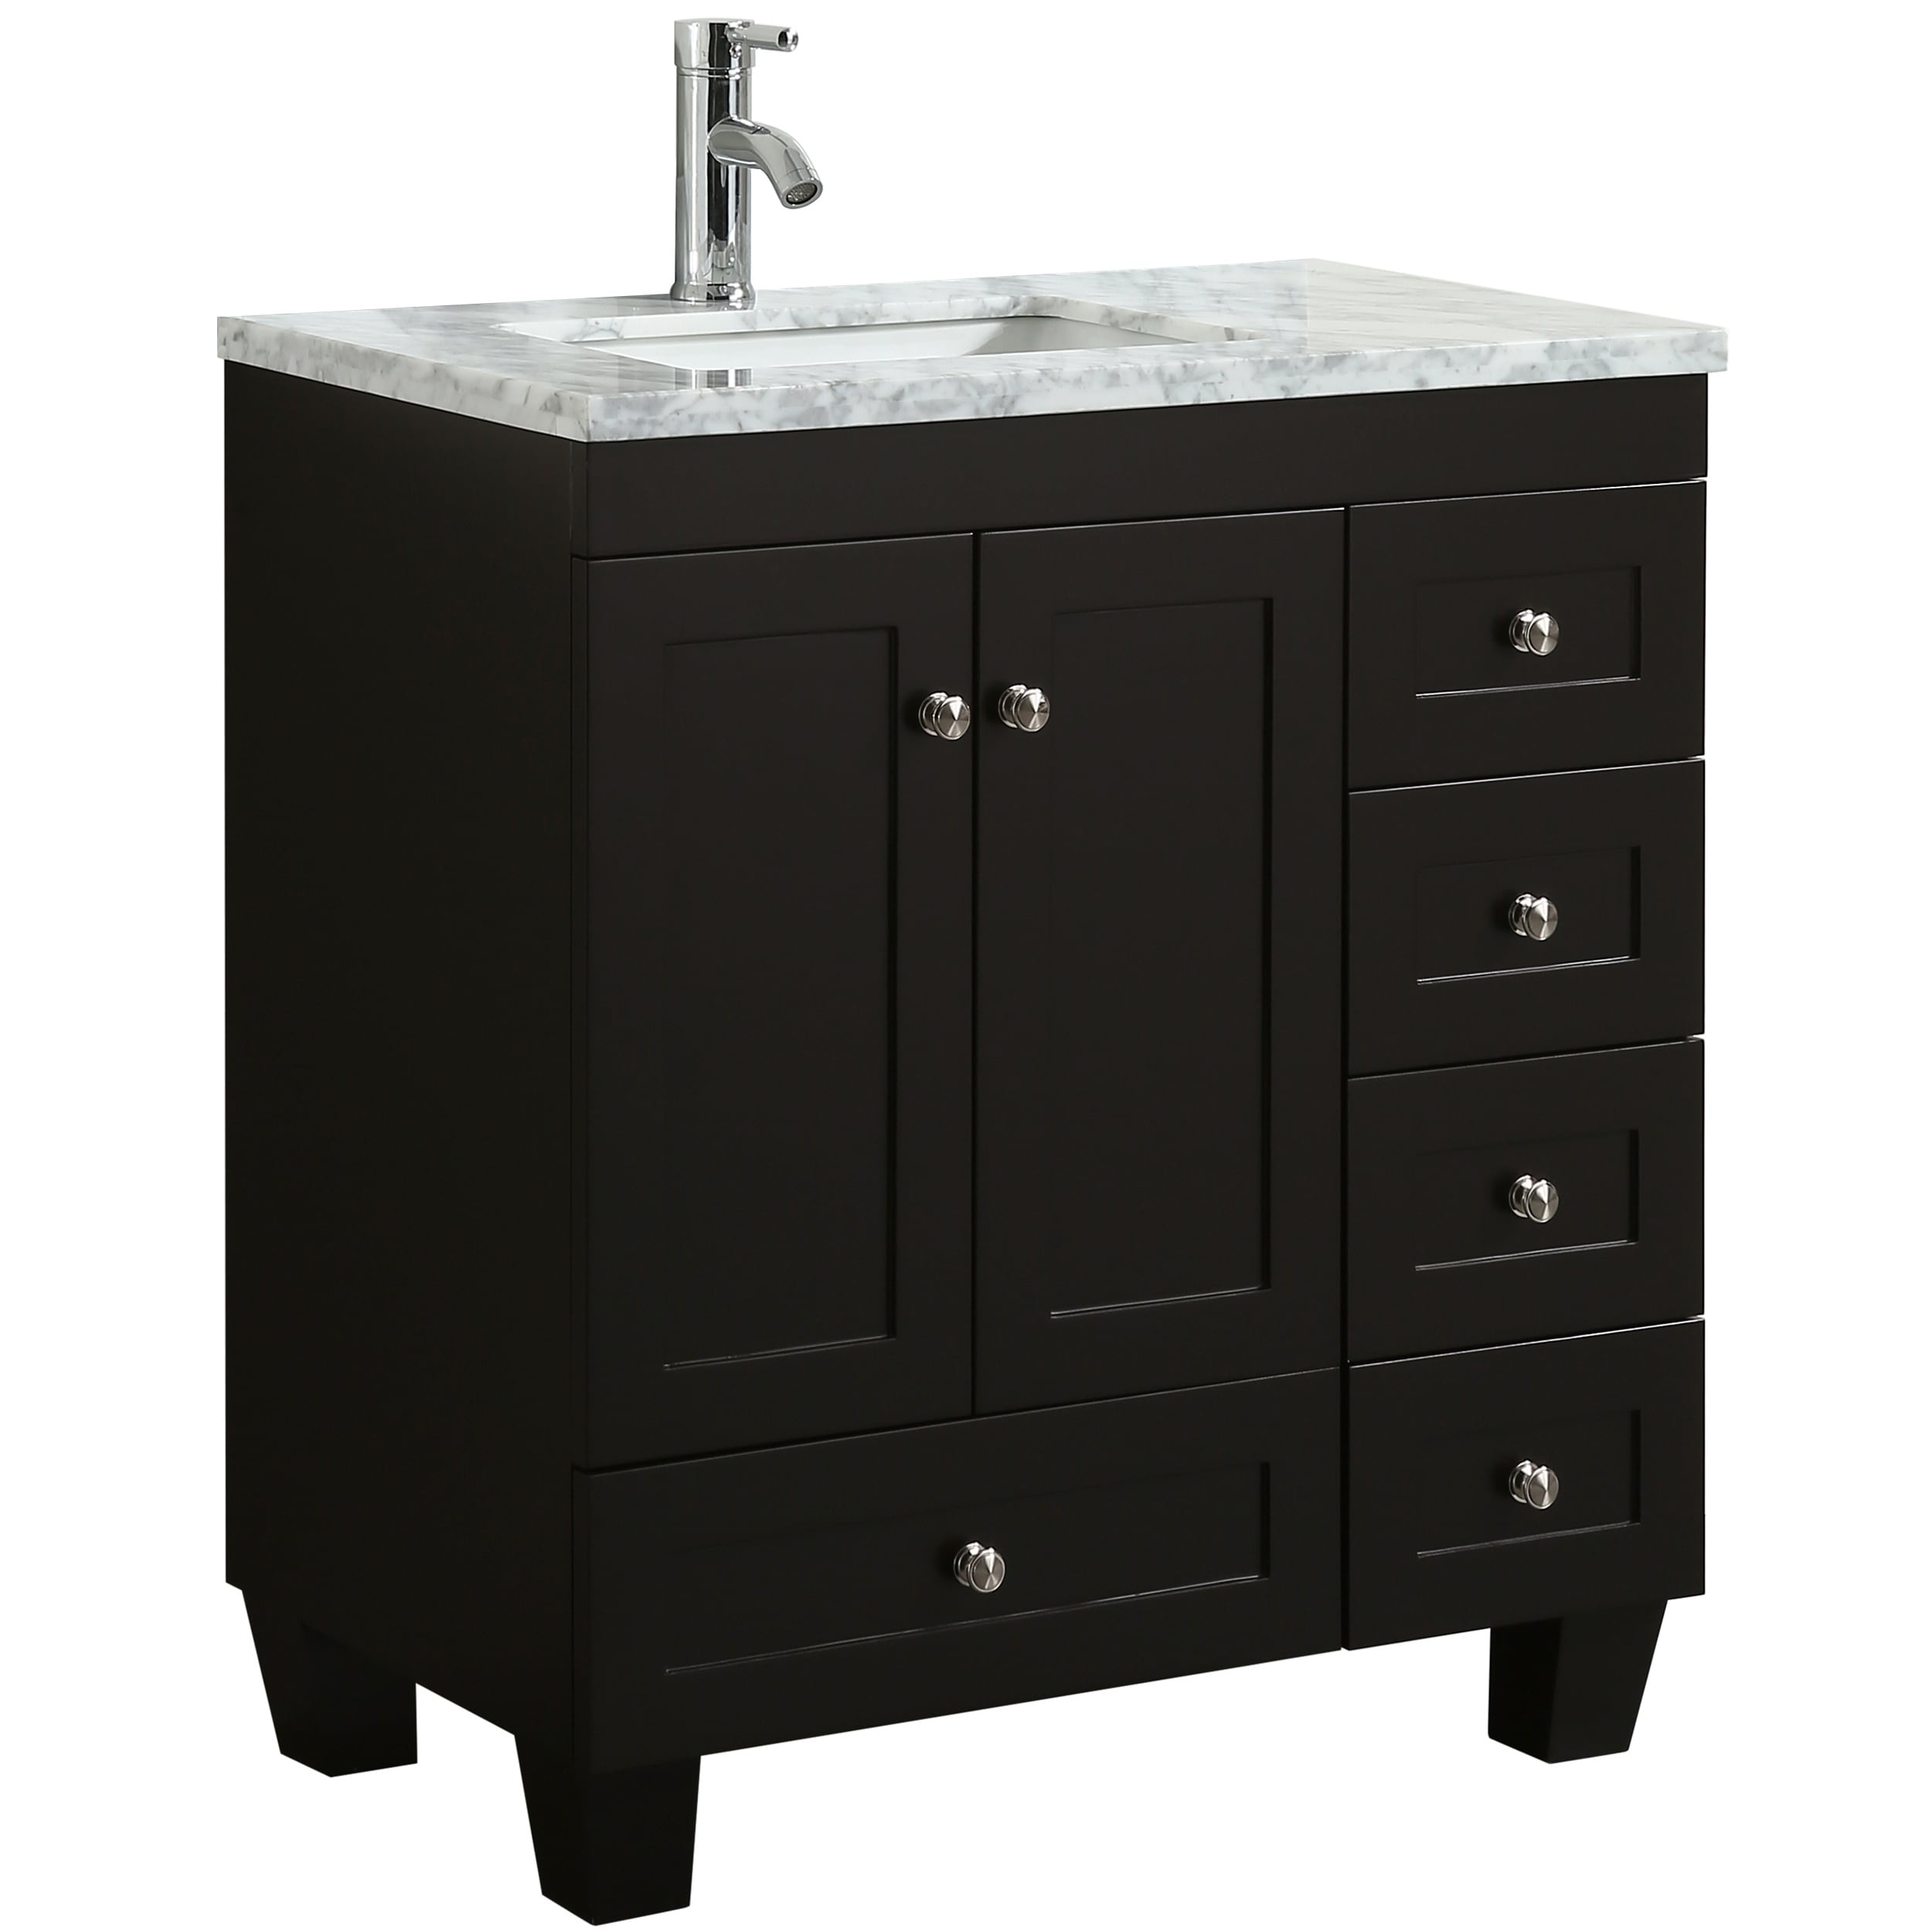 Eviva Happy 30 Inch X 18 Inch Espresso Transitional Vanity With White Carrara Marble Countertop And Undermount Porcelain Sink Overstock 20817210